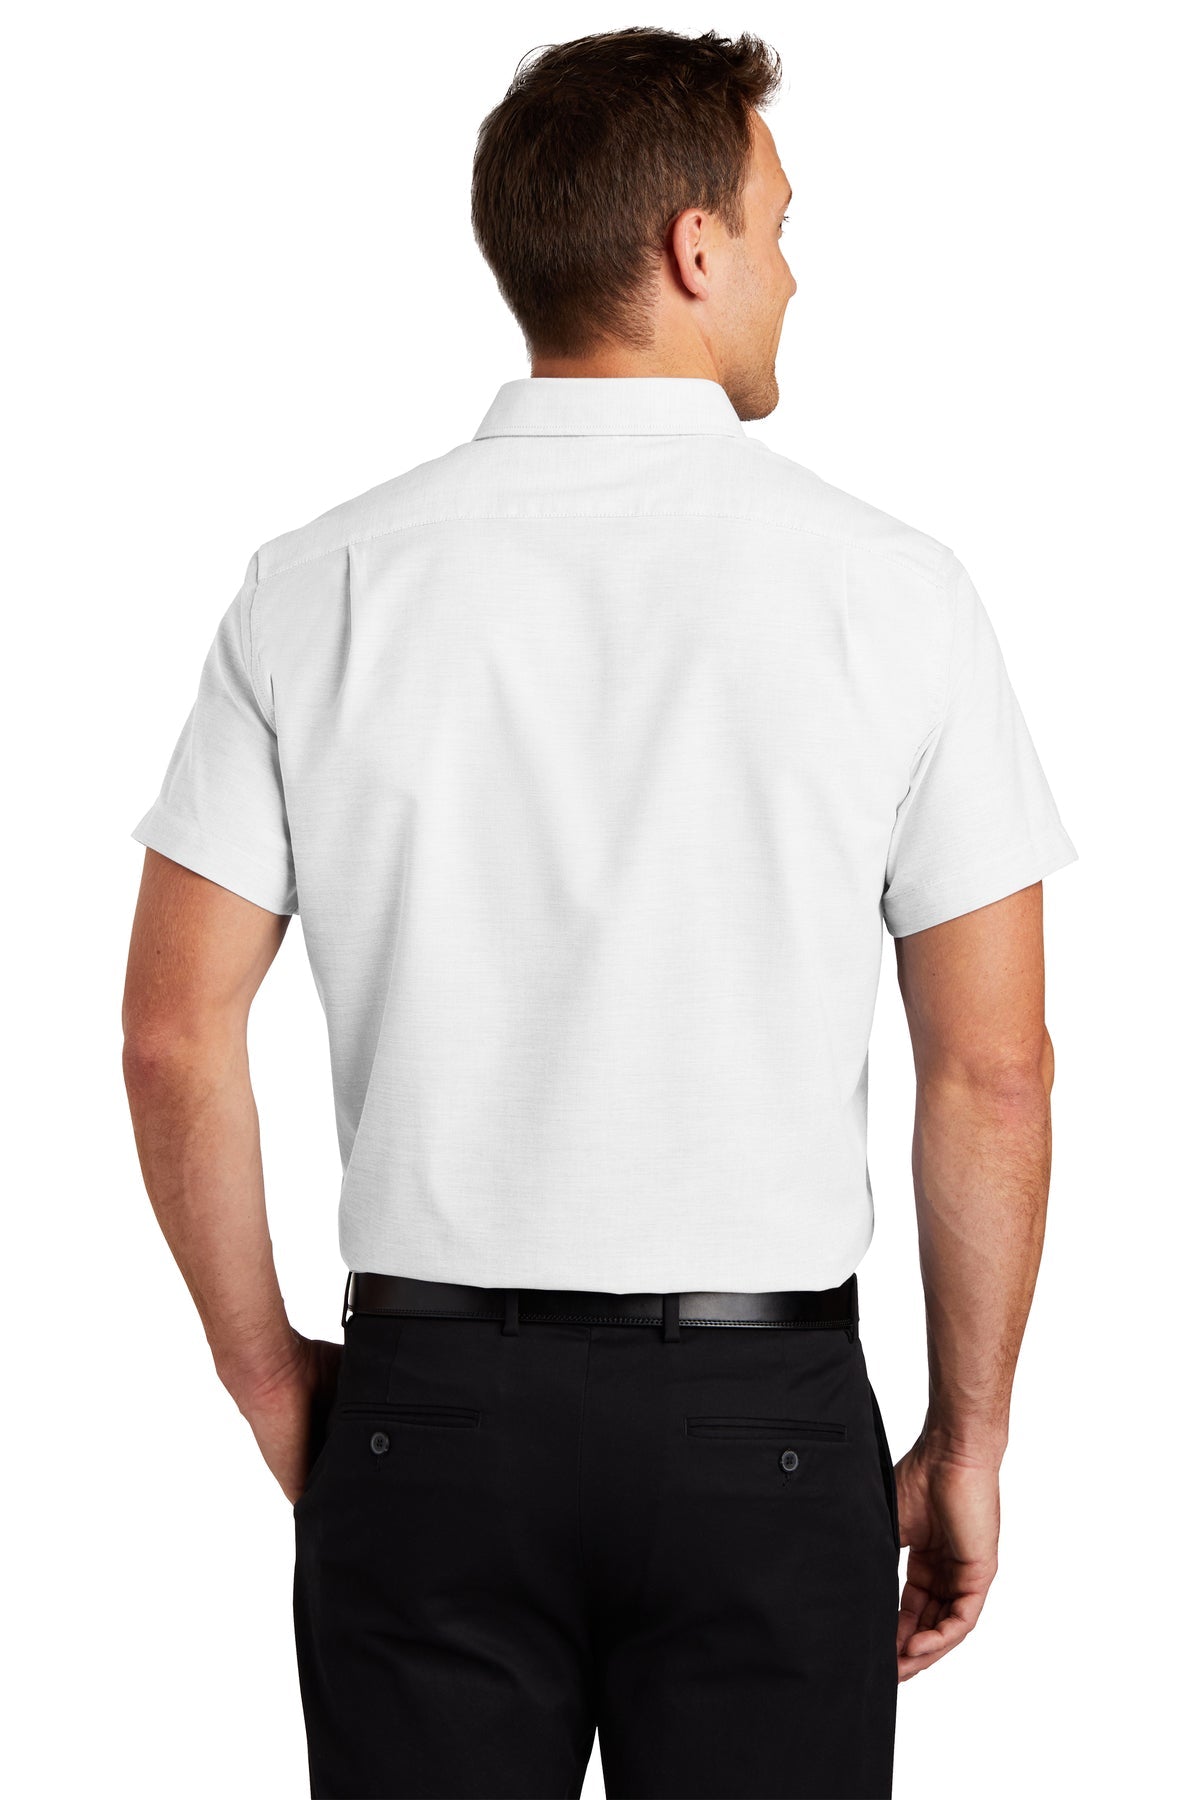 port authority_s659 _white_company_logo_button downs